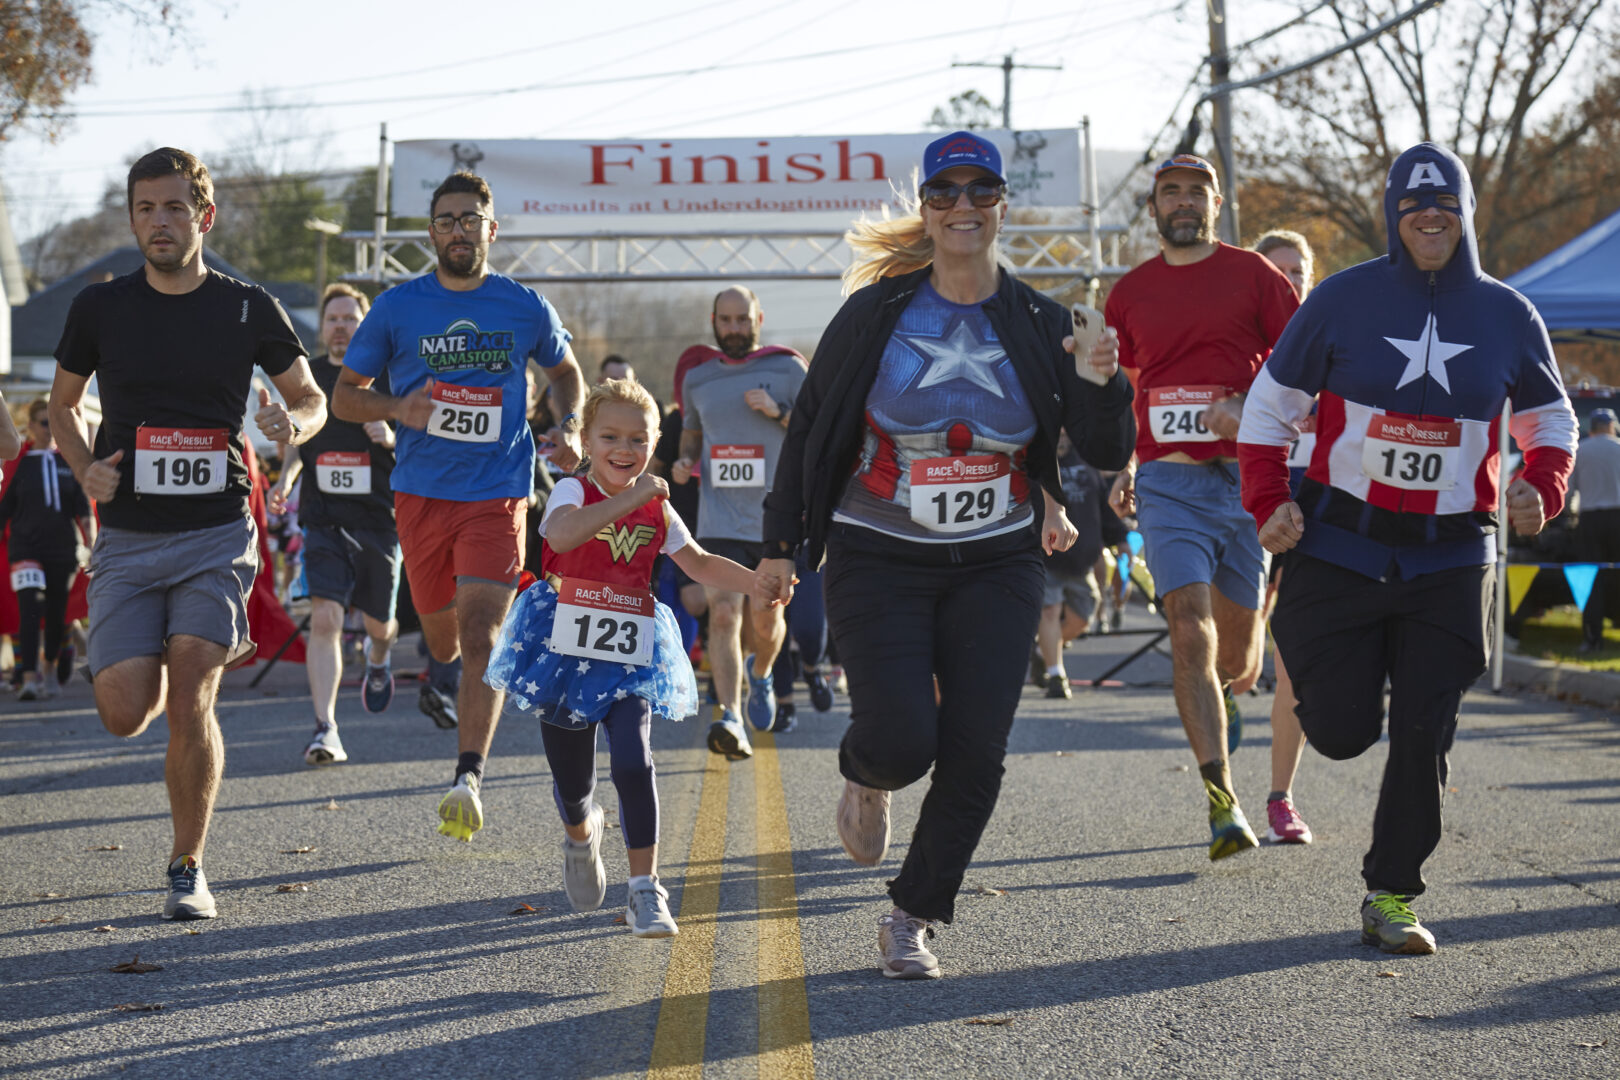 Little girl dressed in Supehreo Costume holding woman in superhero costume's hand at start of race. Other racers pictured in background.